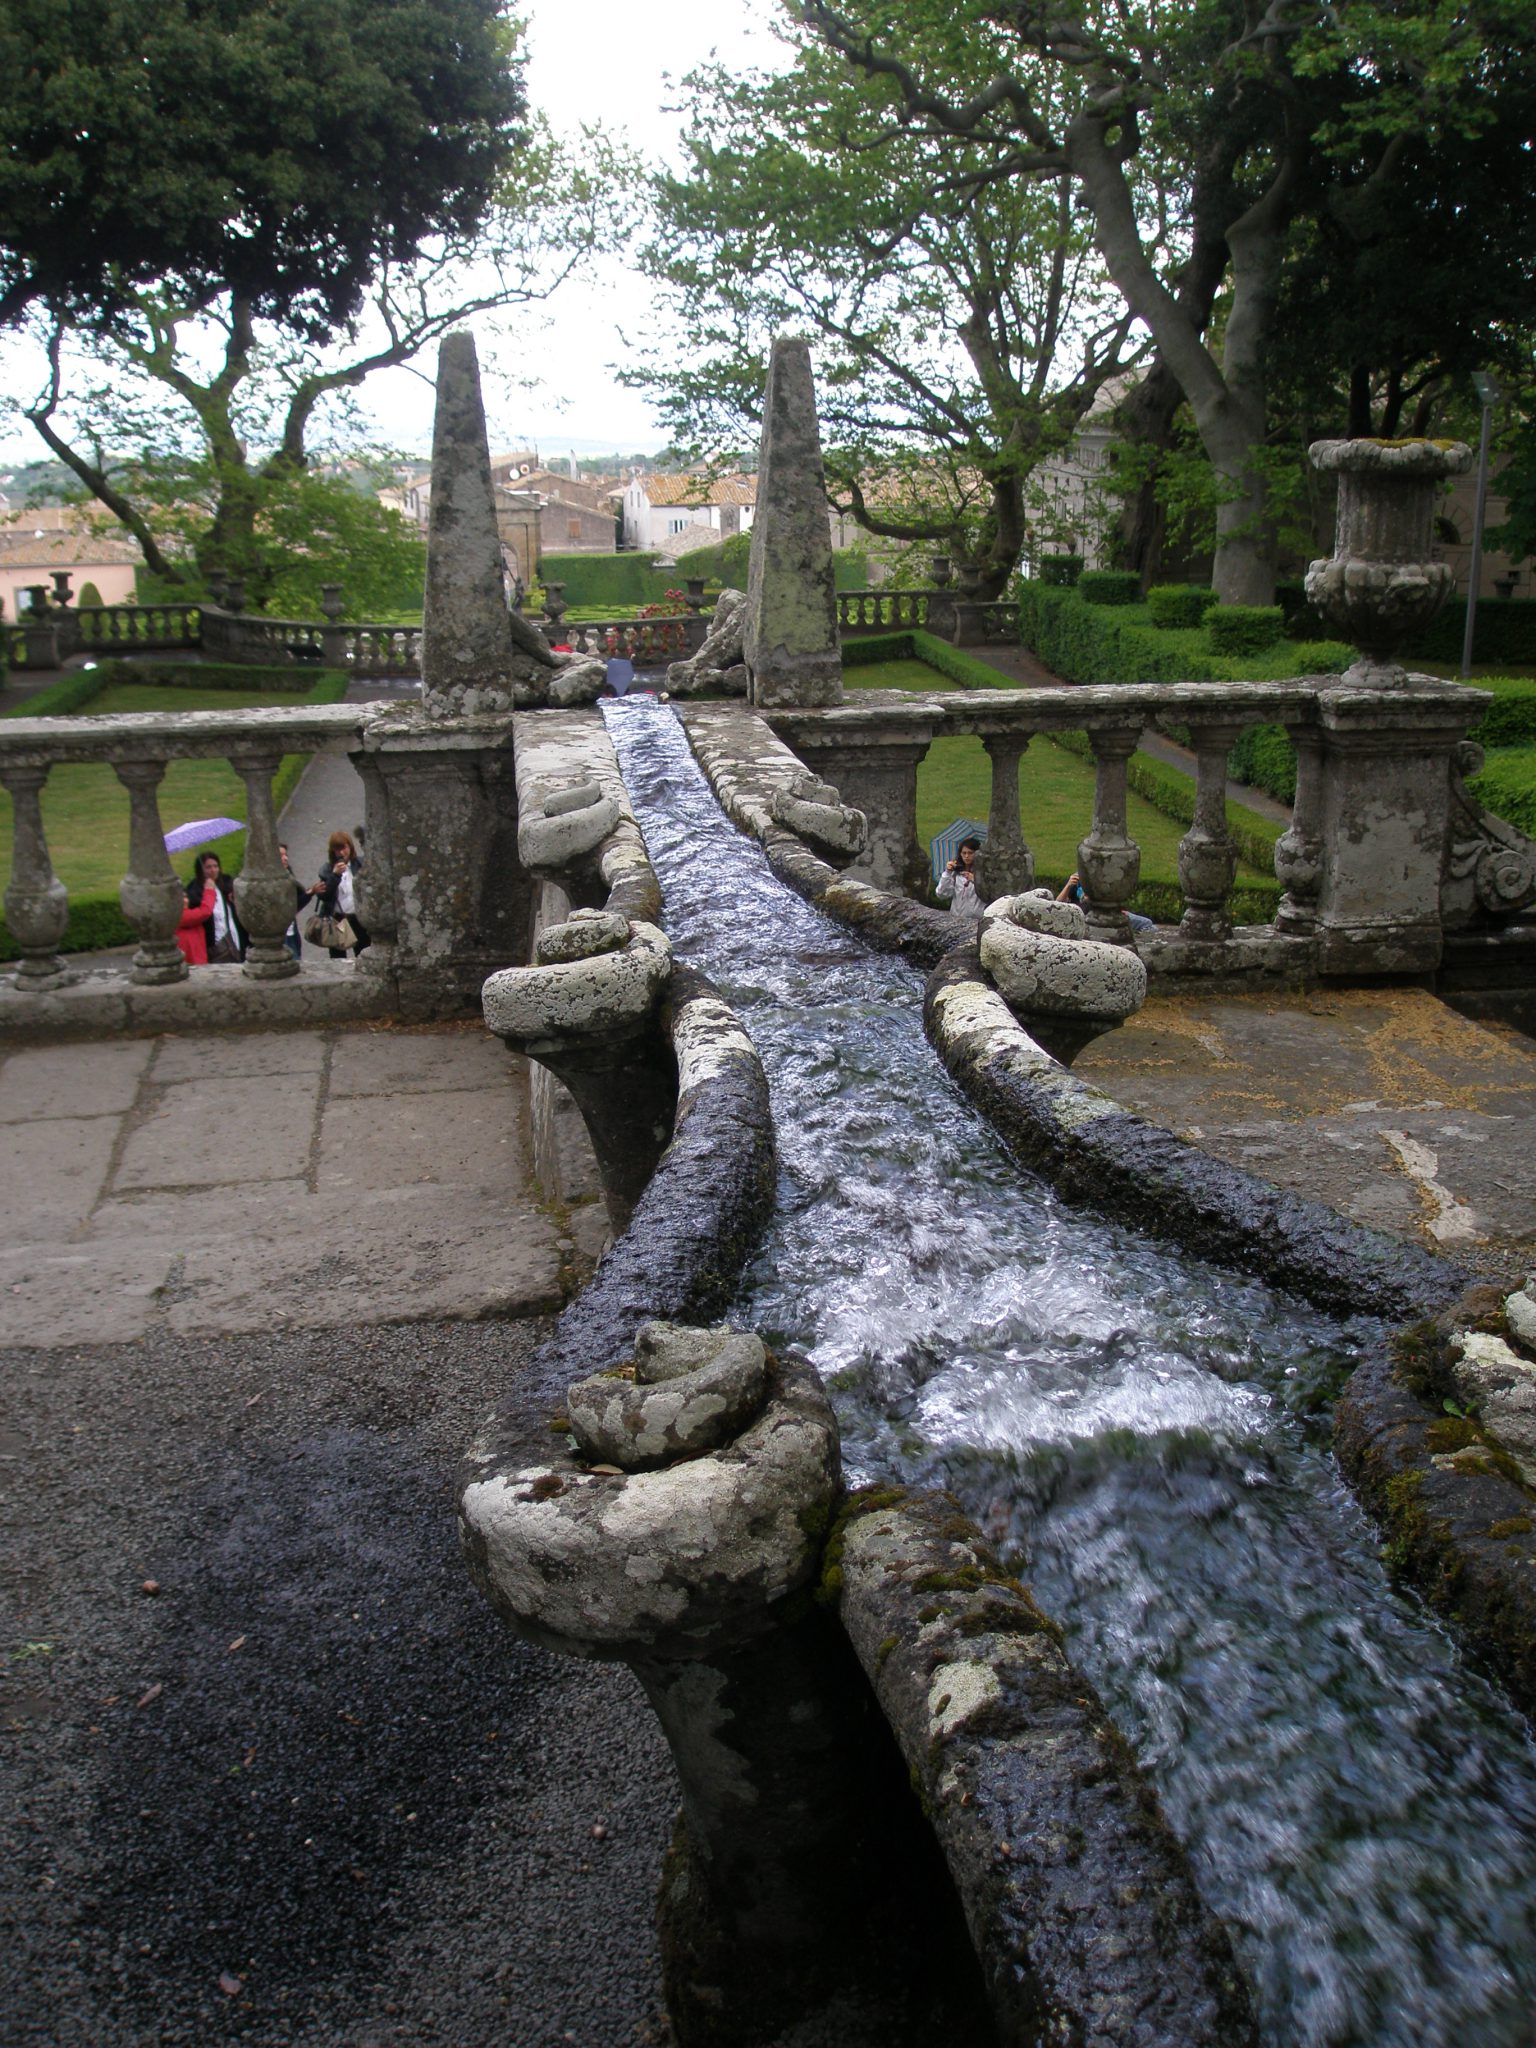 Two Obelisks mark the lowest point of the Water Chain. Directly below the balustrade is the Fountain of the Giants (or Rivers).